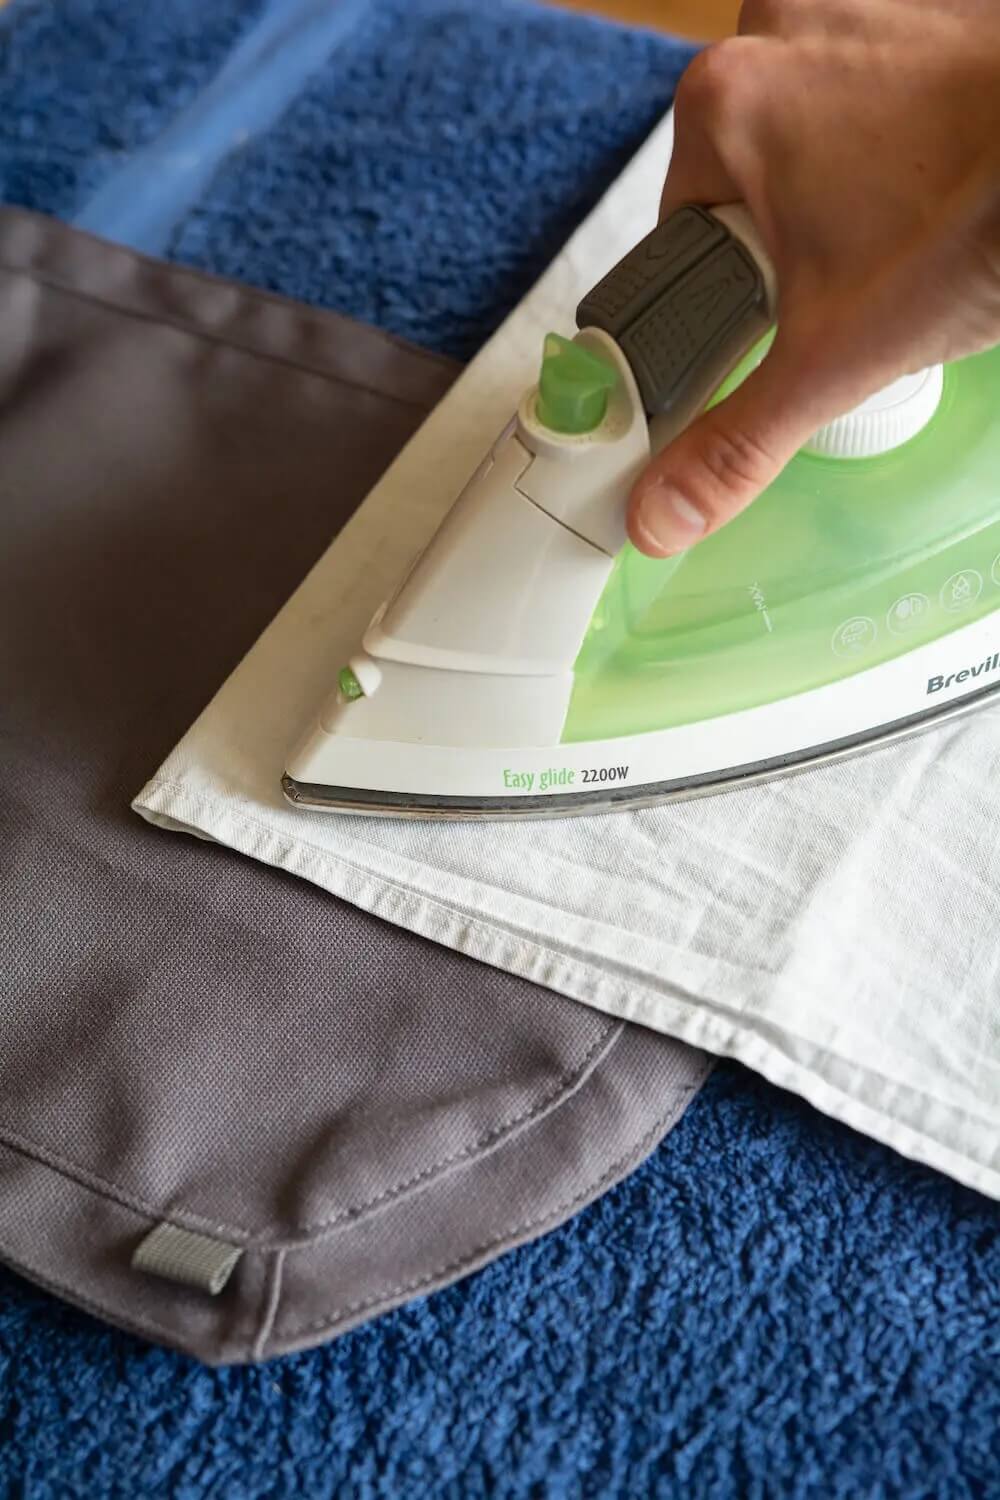 How to Iron on Patches: An Easy Step-by-Step Tutorial